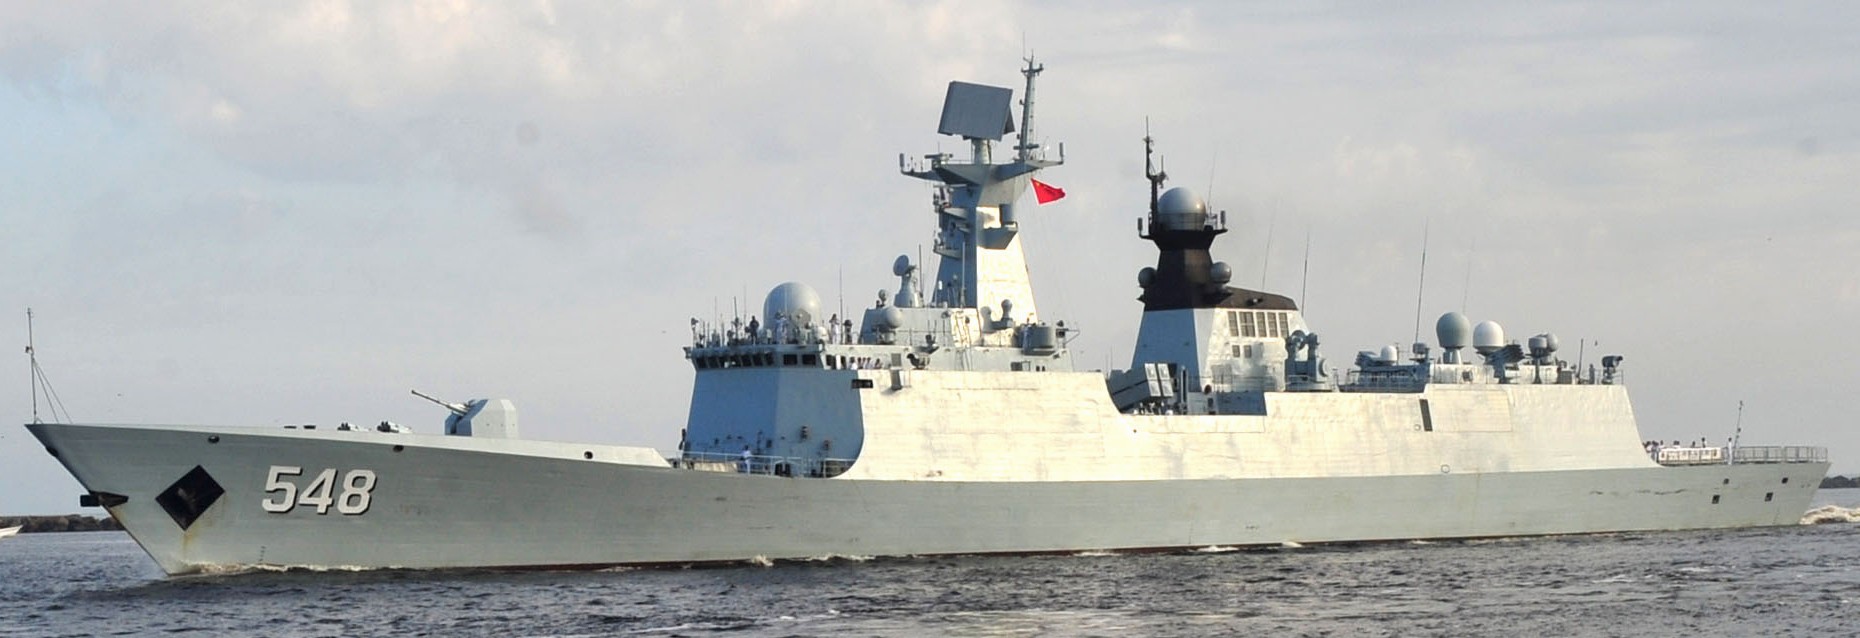 ffg-548 plans yiyang type 054a jiangkai ii class guided missile frigate china people's liberation army navy 06